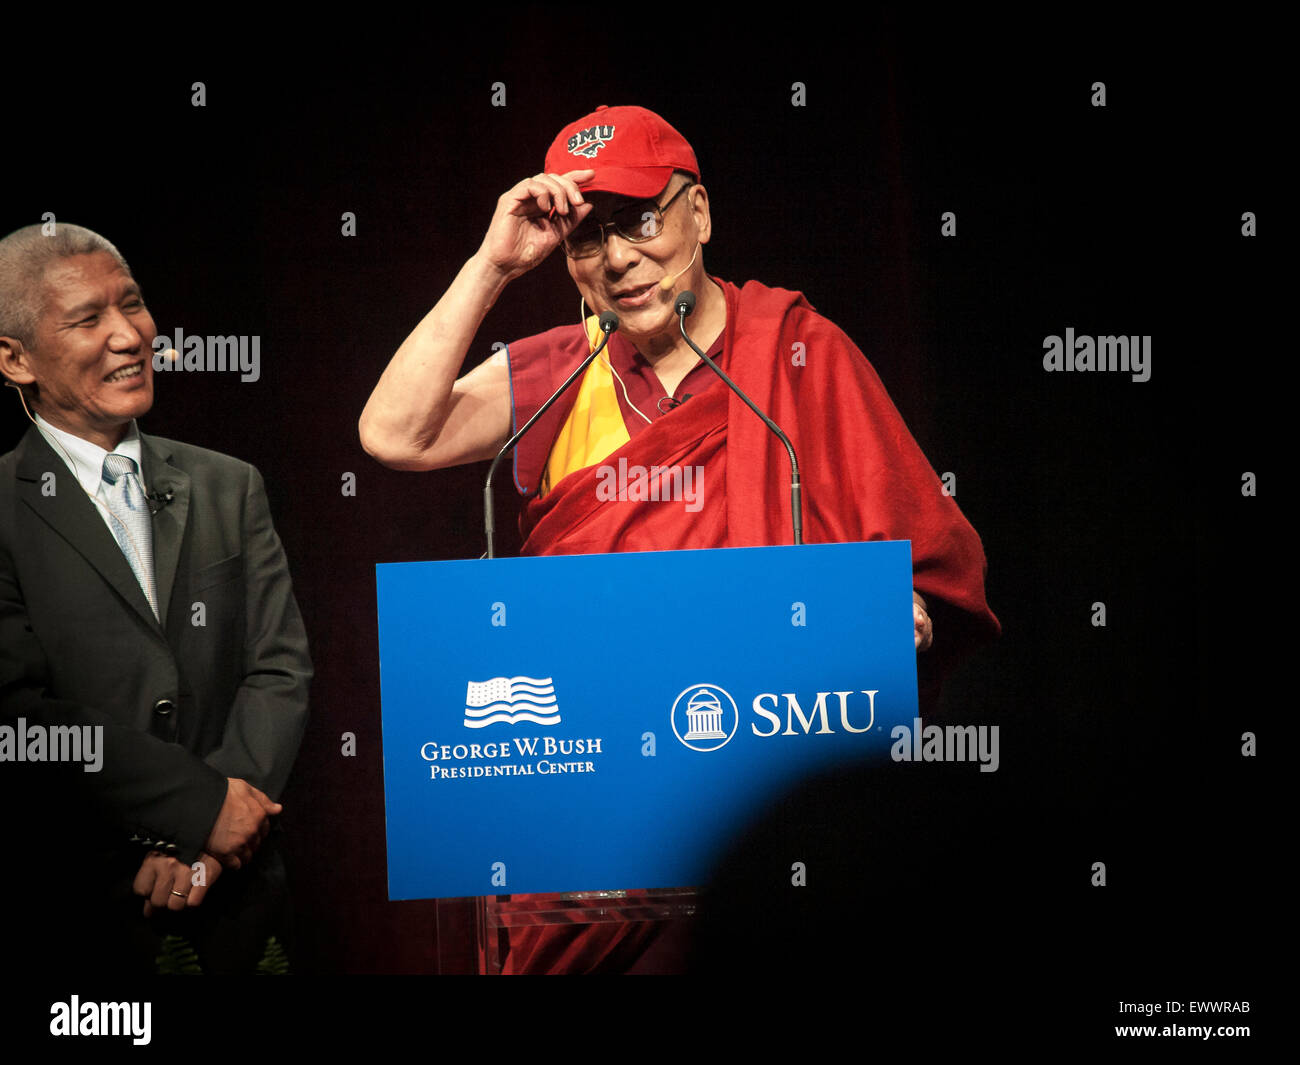 Dallas, Texas, USA. 1st July, 2015. Dalai Lama returns to Southern Methodist University in Dallas, Texas and wears an SMU baseball cap to shield his eyes from bright lights on stage in front of 5200 people. His translator stands next to him. Credit:  J. G. Domke/Alamy Live News Stock Photo